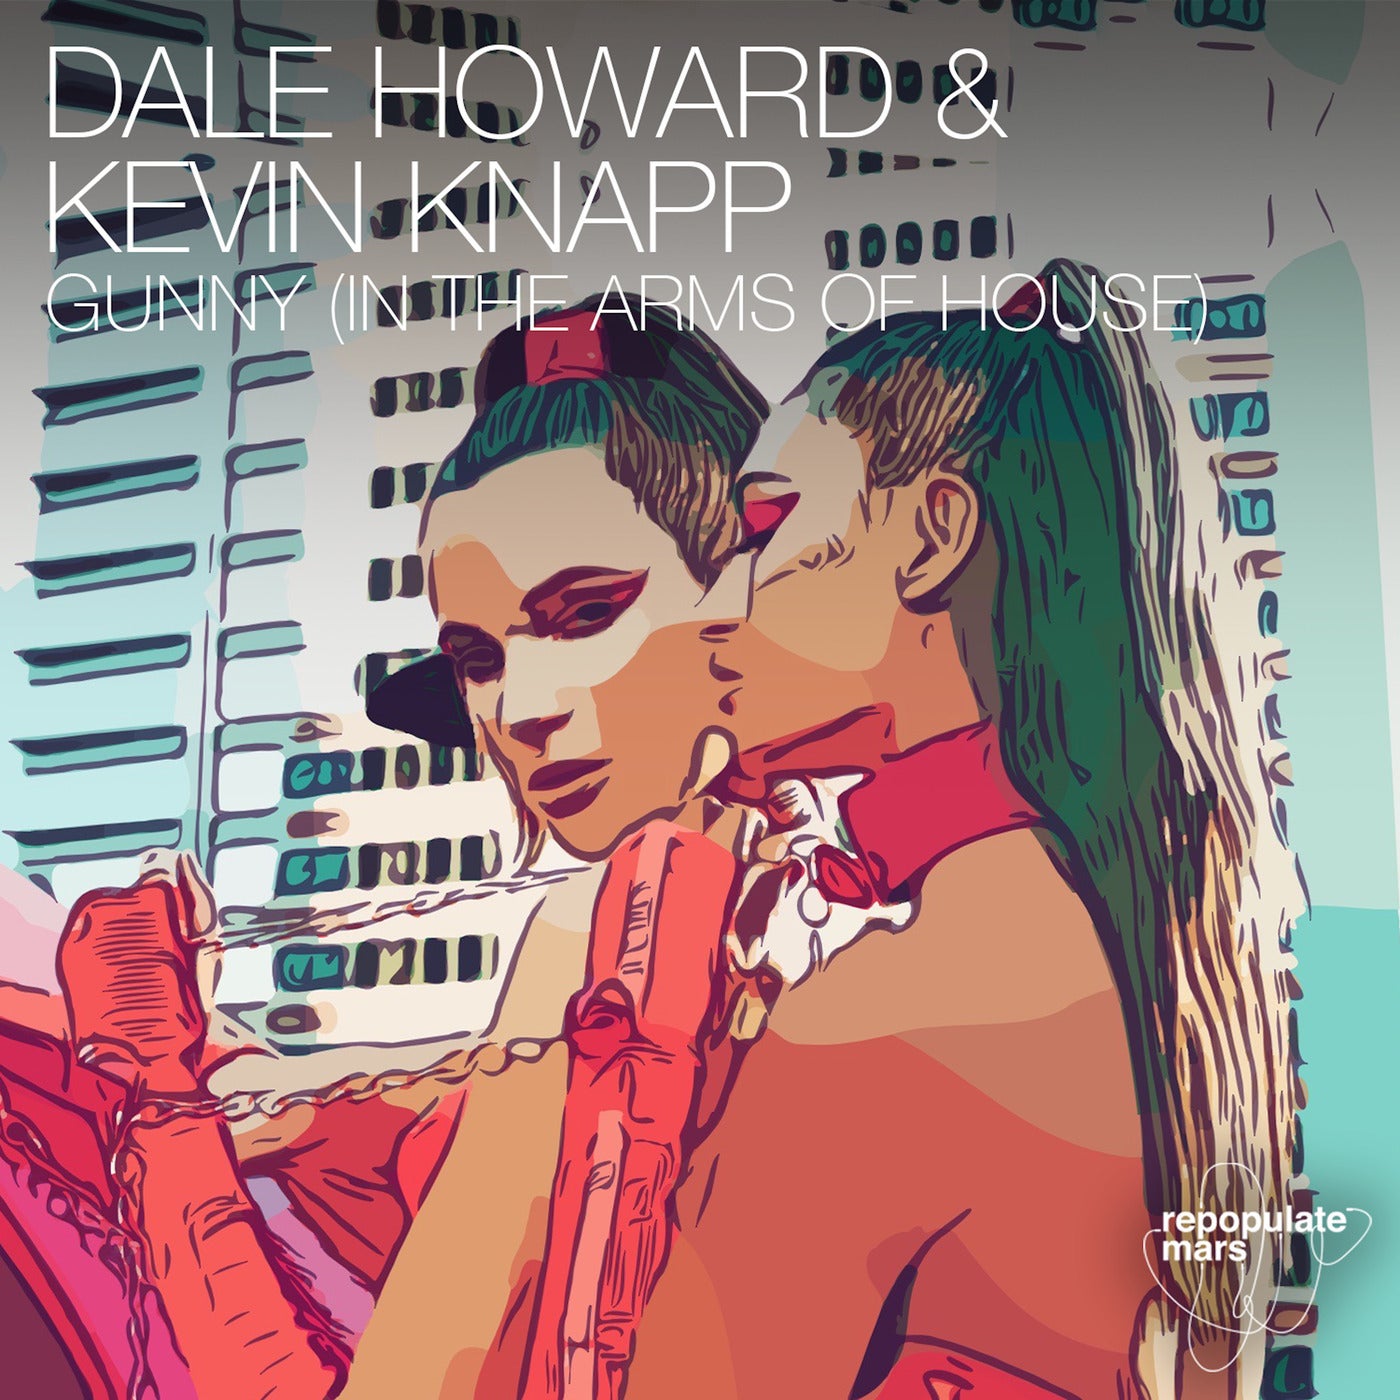 Dale Howard, Kevin Knapp - Gunny (In The Arms Of House) (Original Mix)